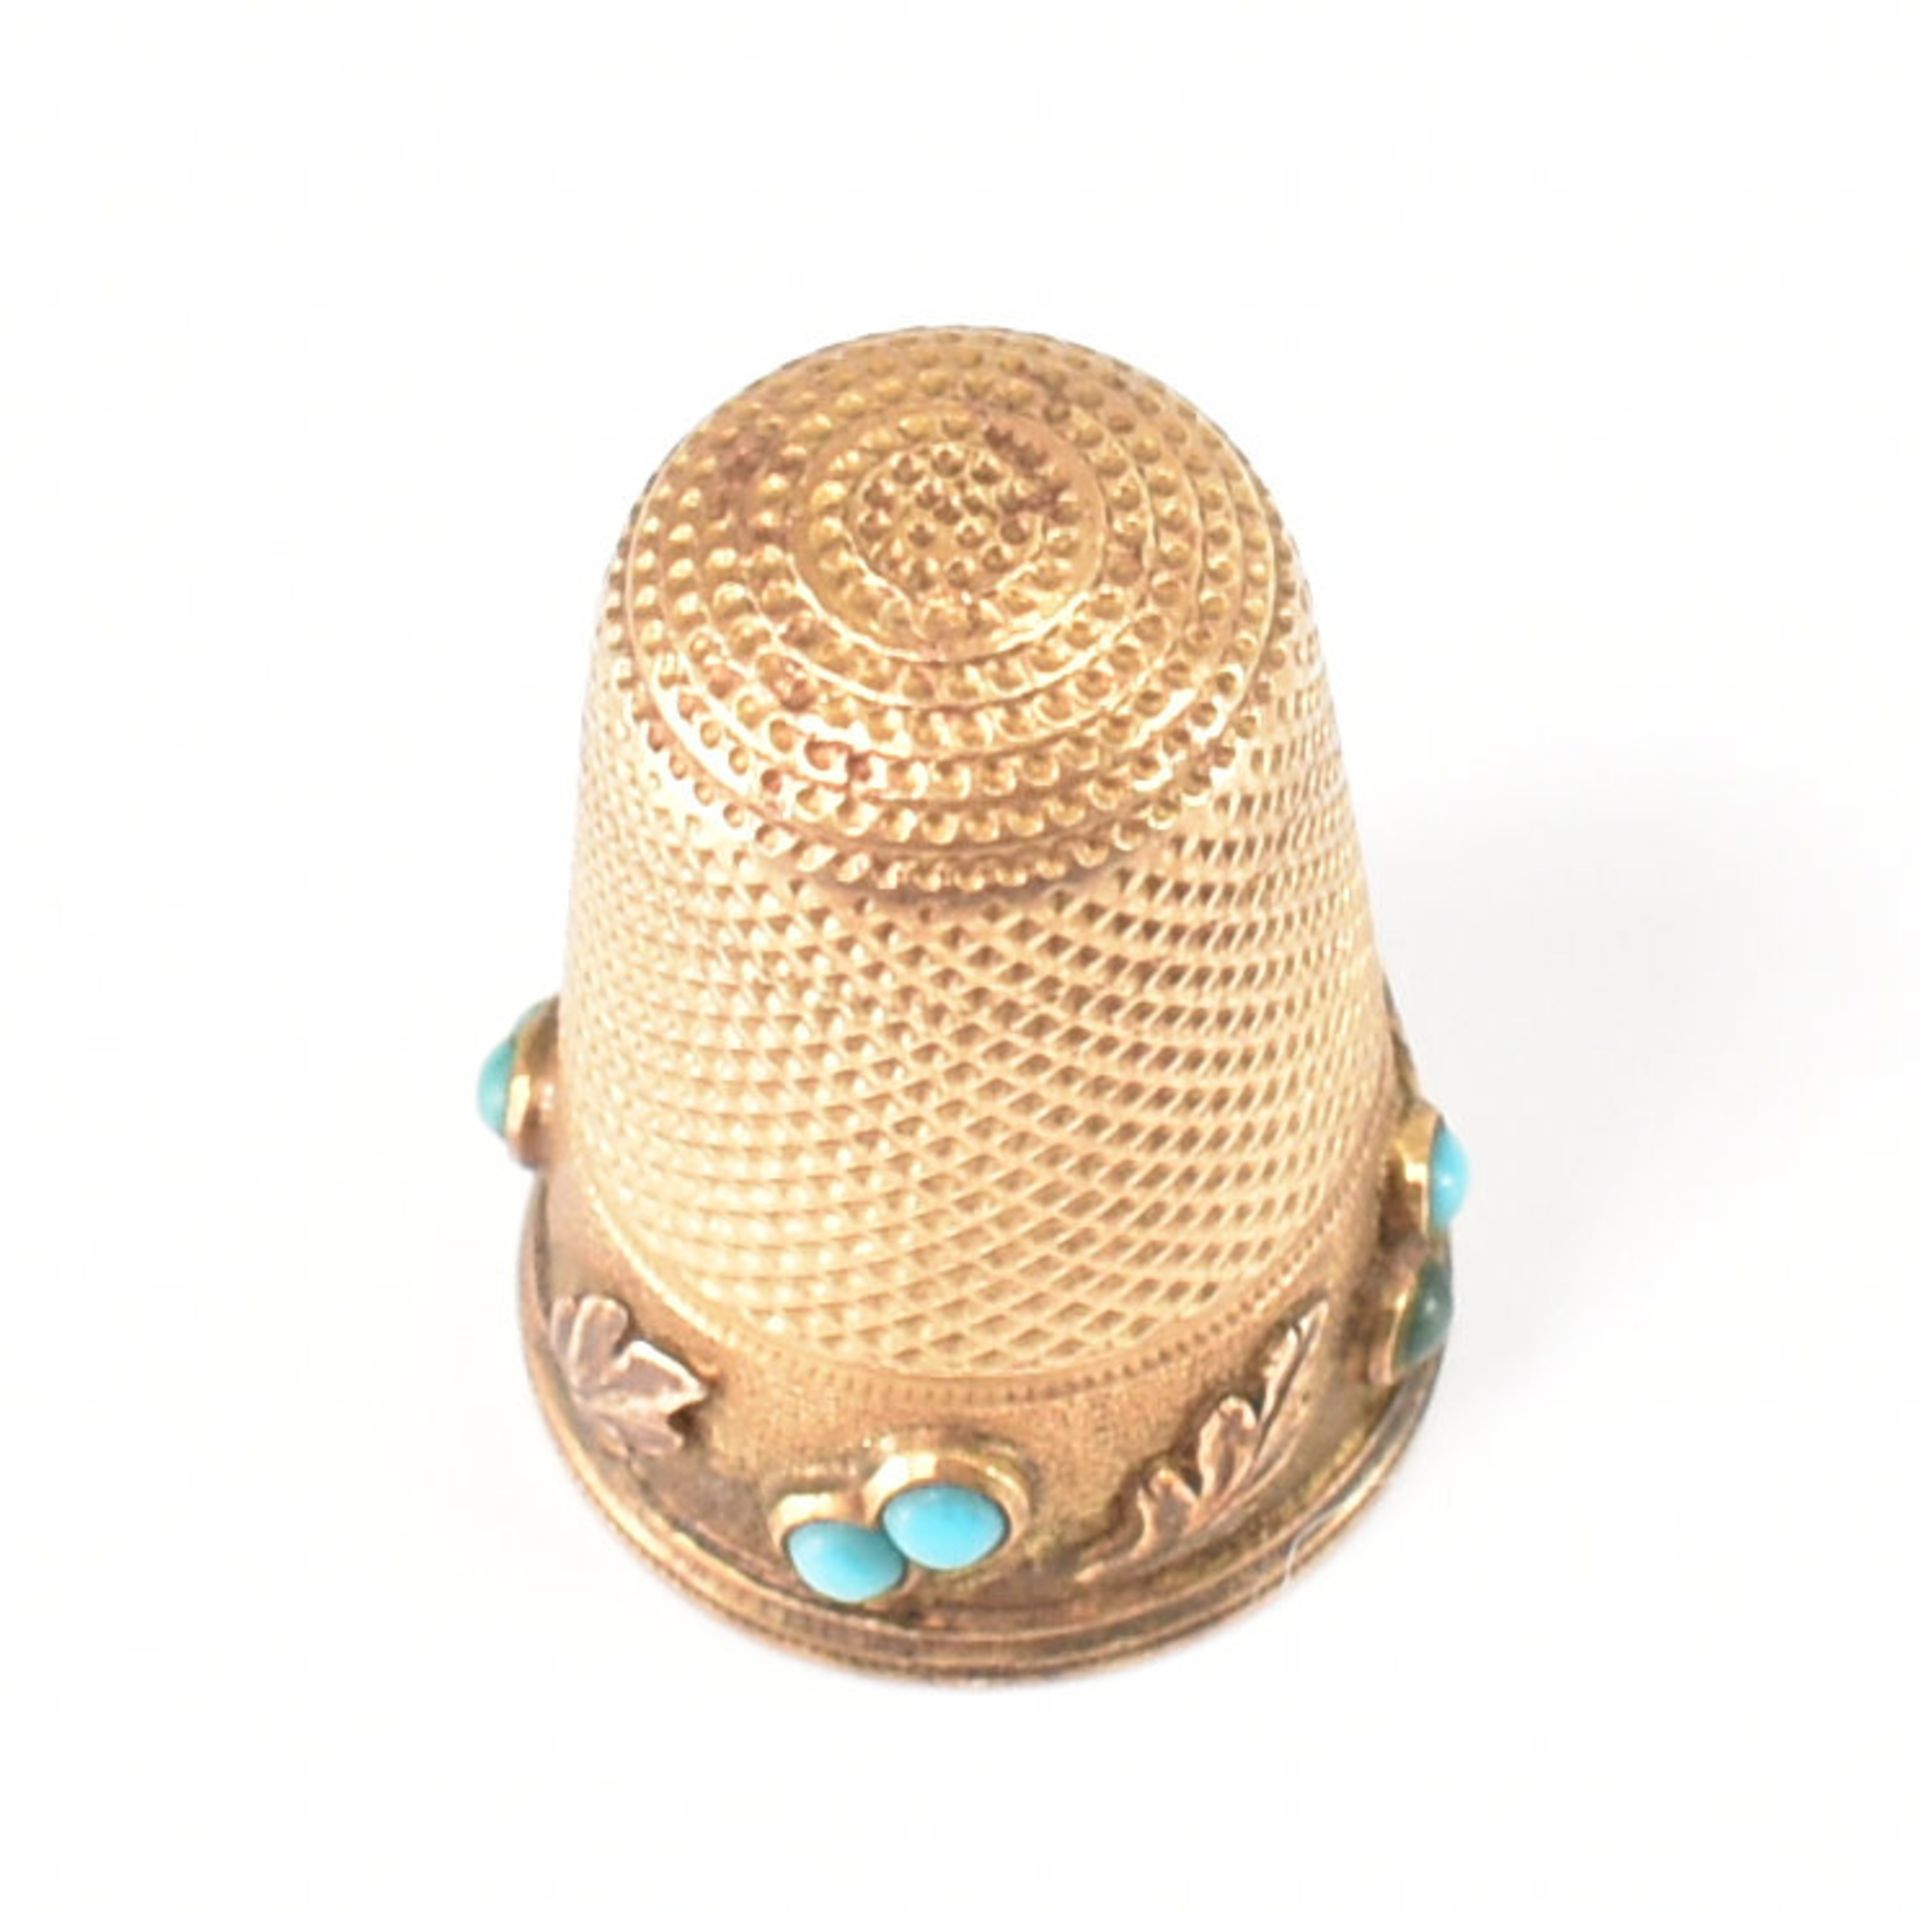 VICTORIAN GOLD & TURQUOISE THIMBLE - Image 5 of 7